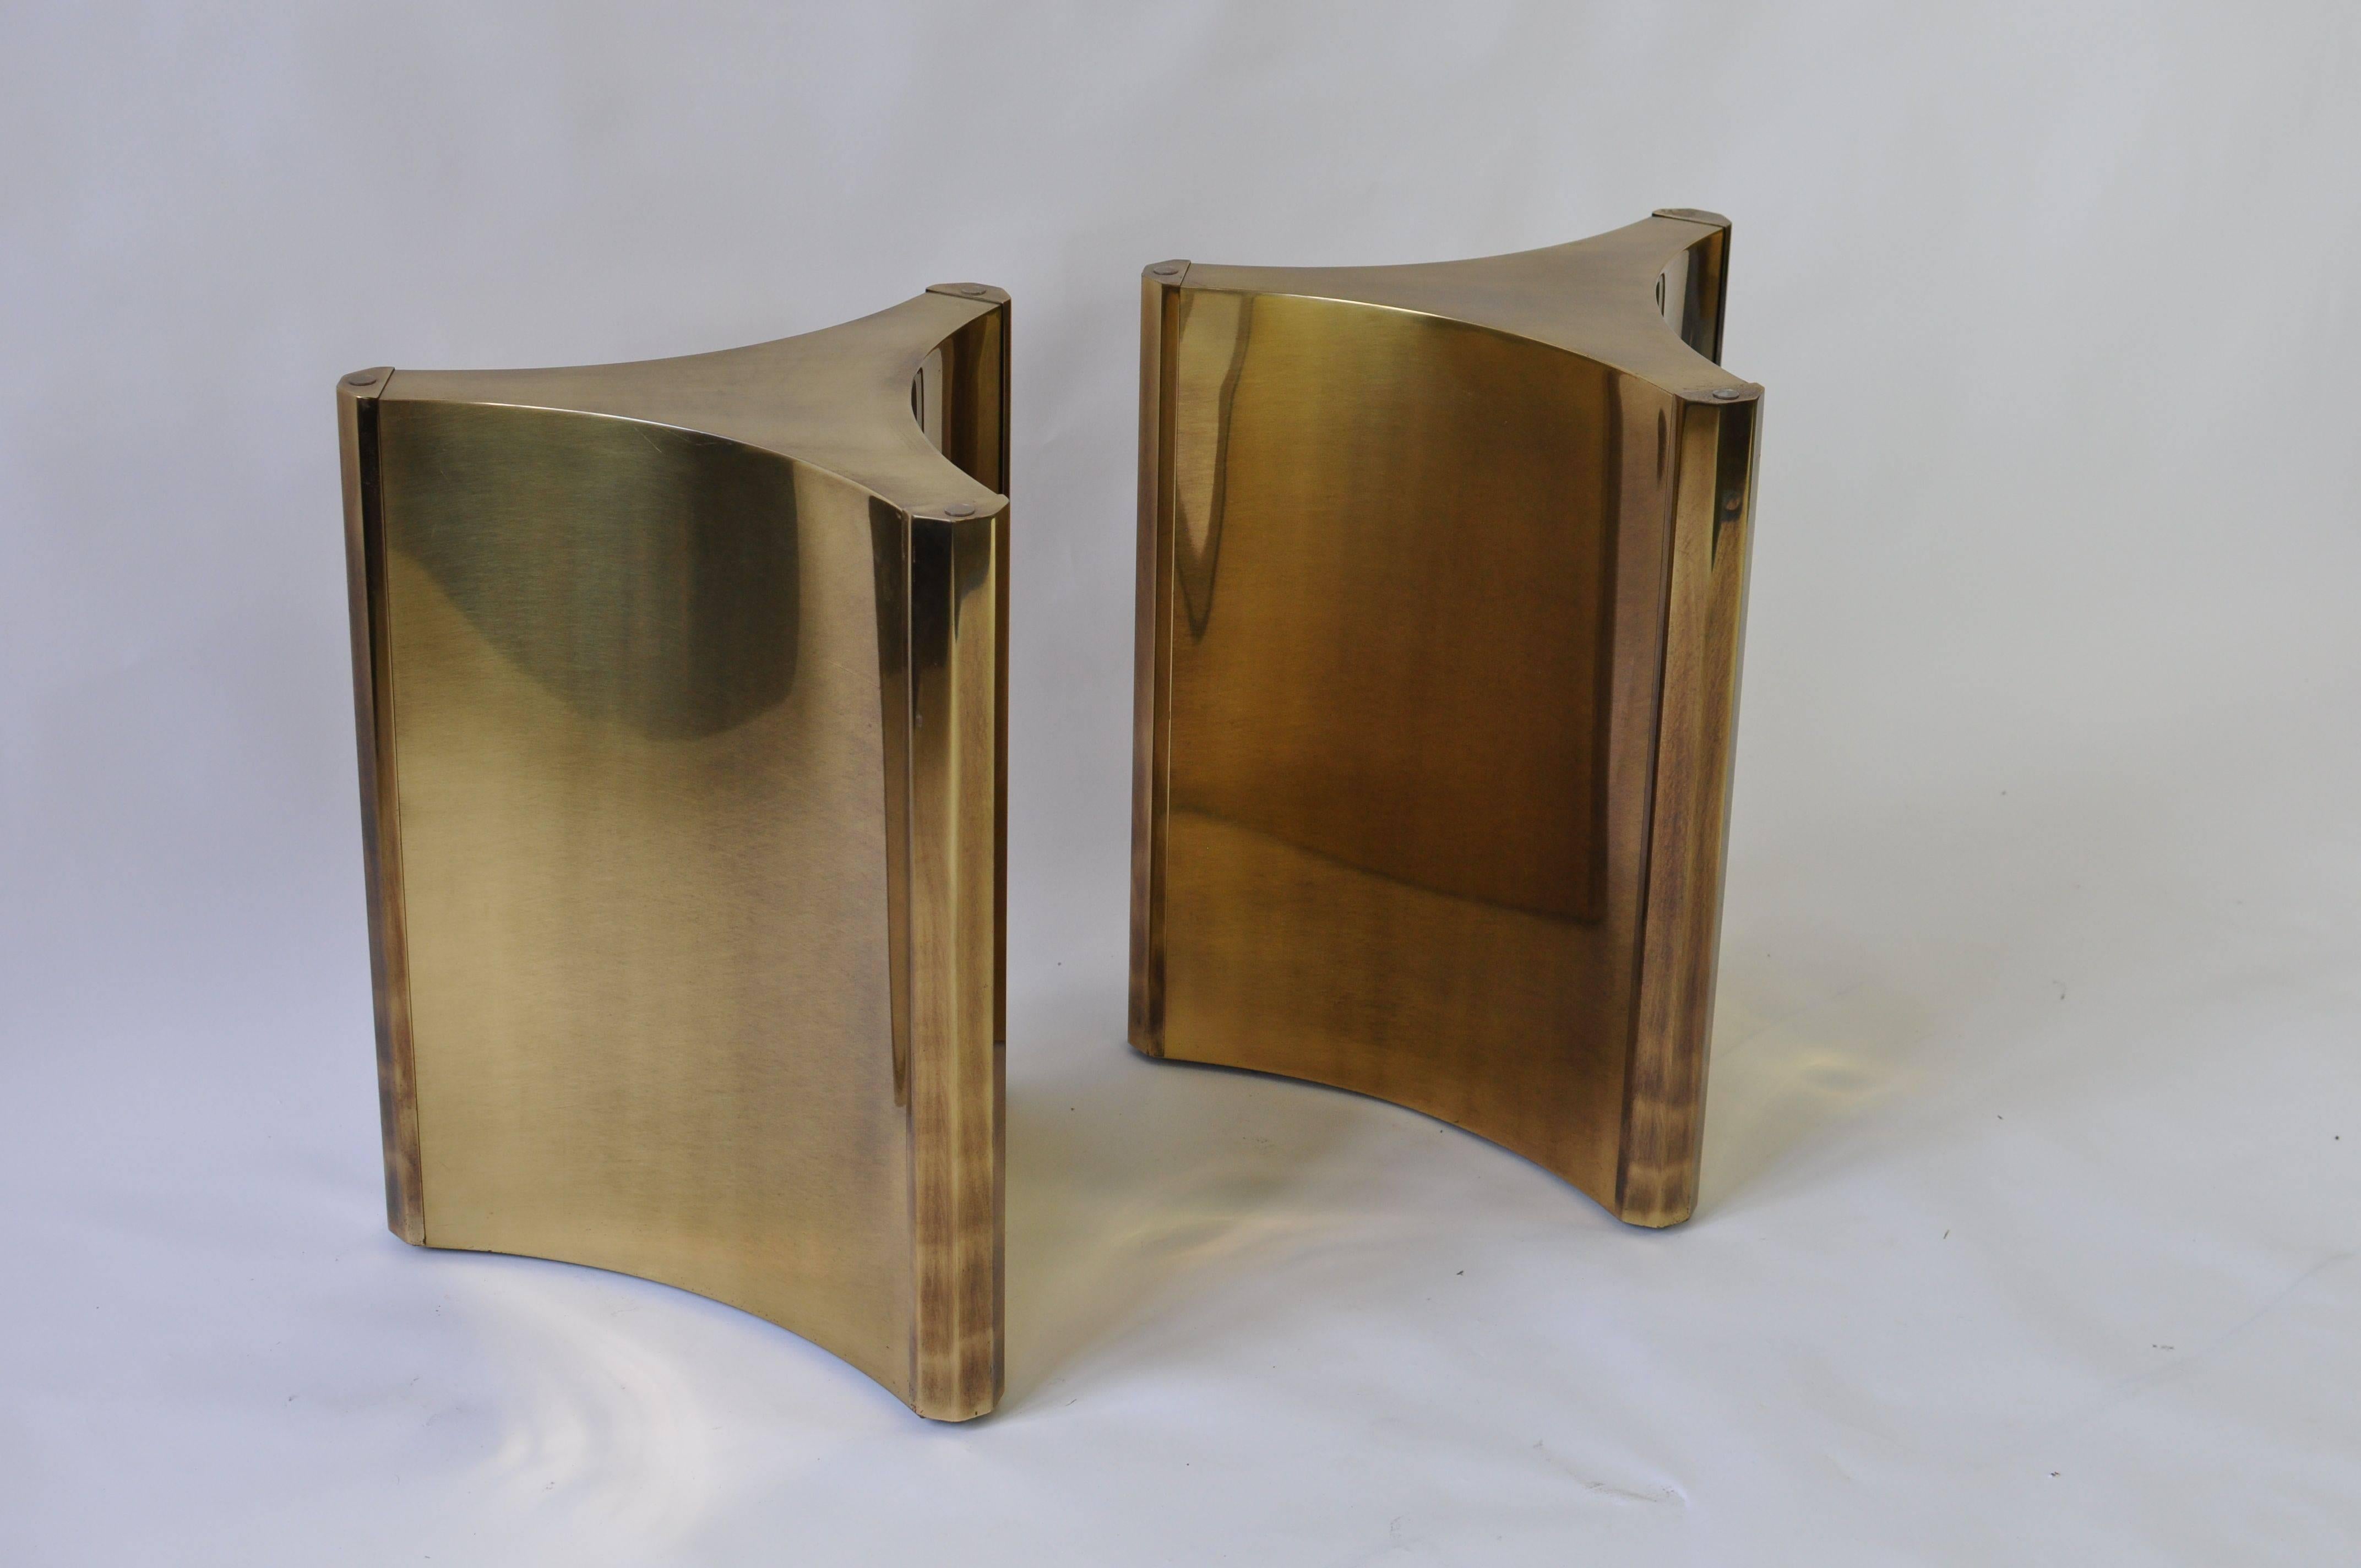 Pair of Mastercraft brass dining table pedestals.

The dimensions of the pedestals from point to point is 21